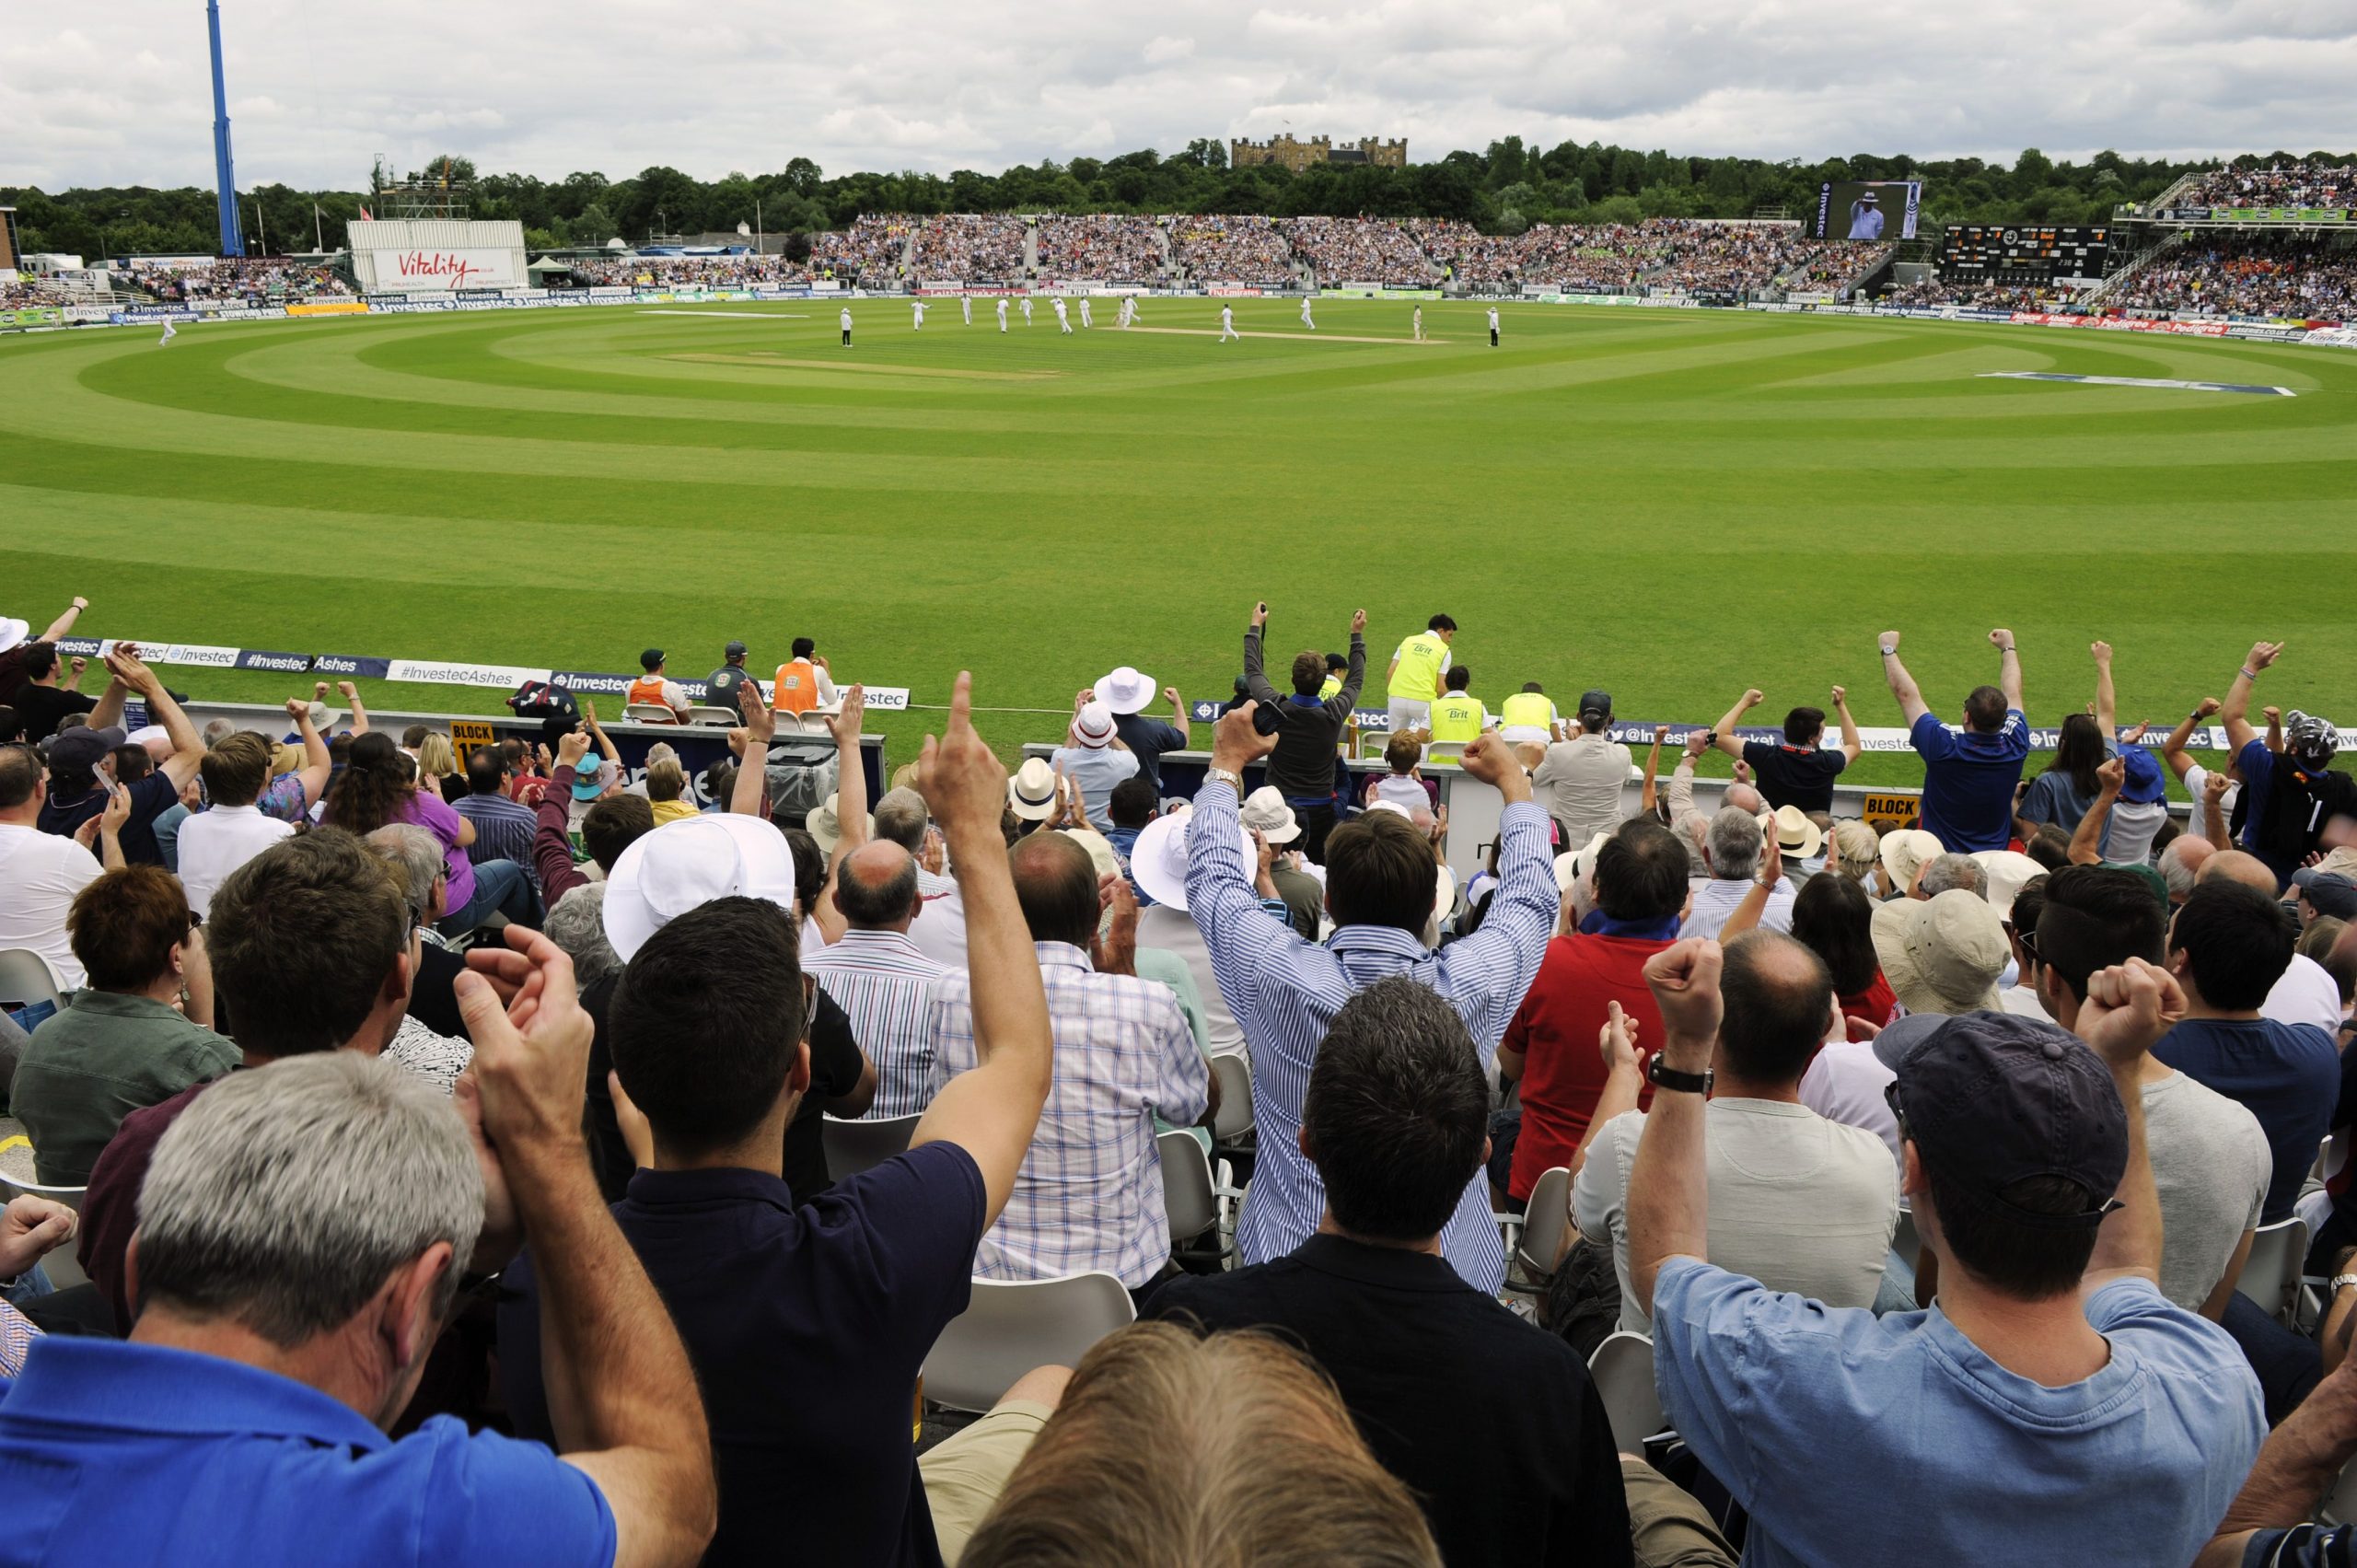 ENG vs IND 2021: Test Series To Be Played In Front of Full Capacity Crowd